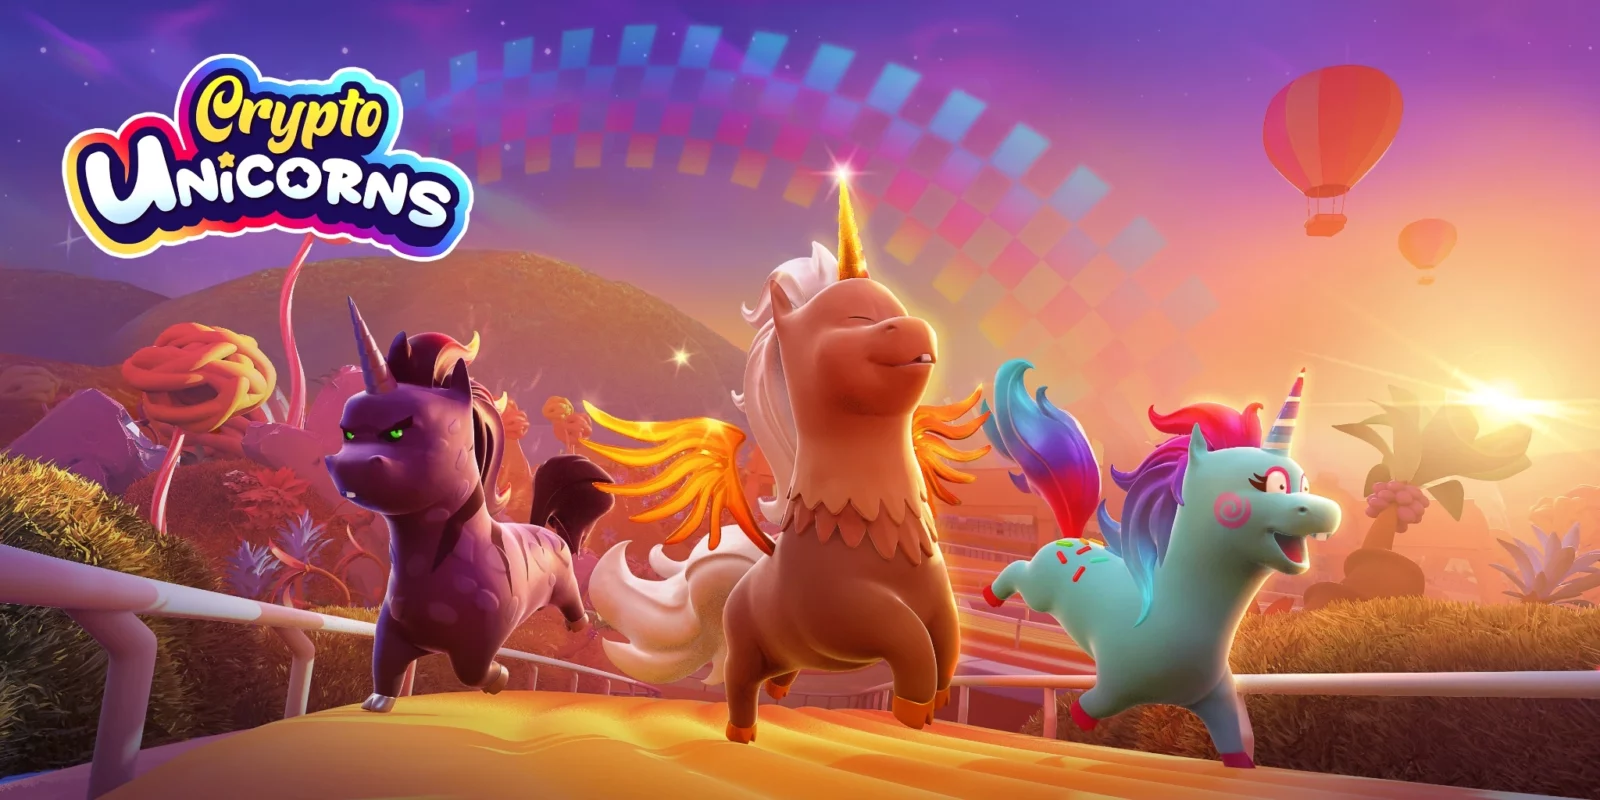 Crypto Unicorns franchise releases 4 new mobile games